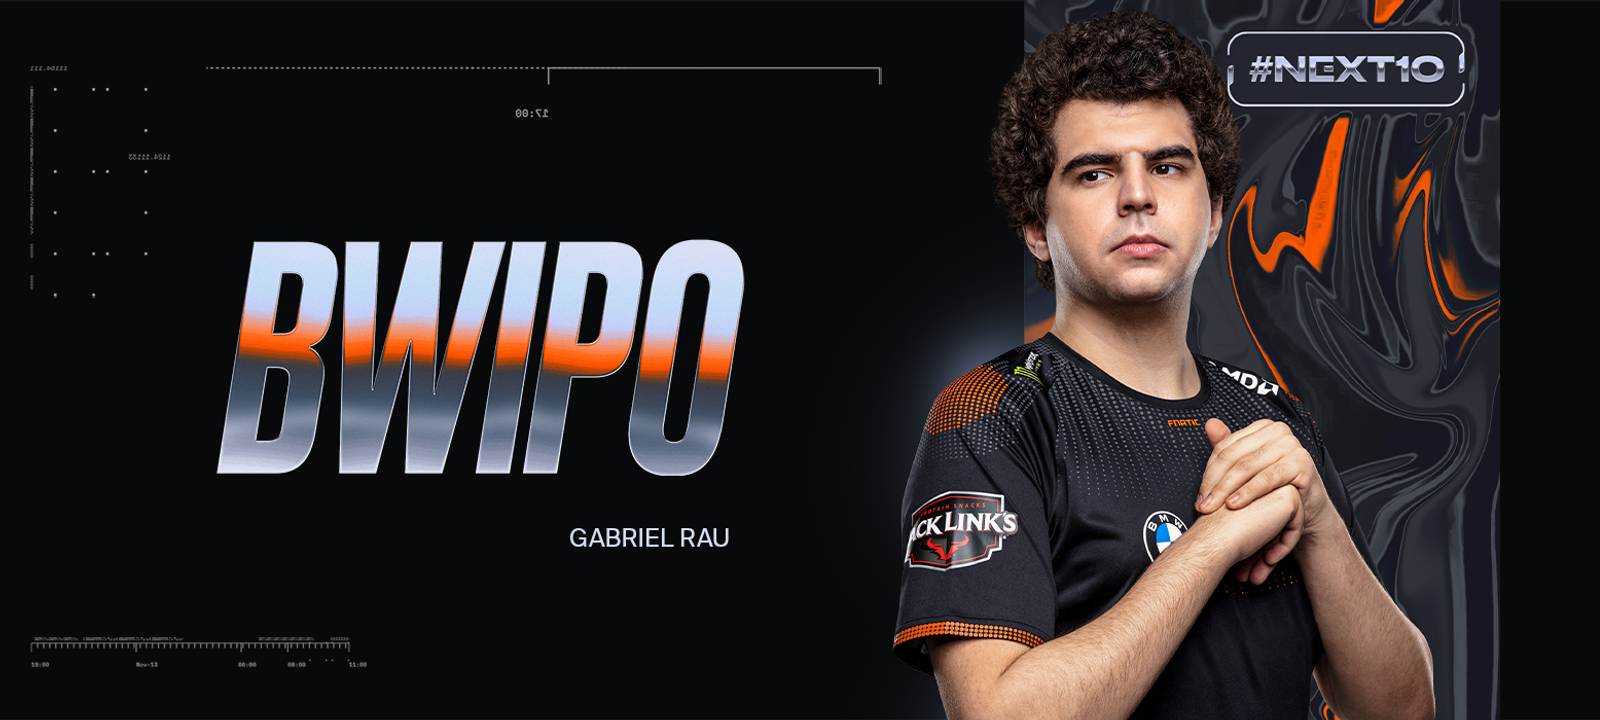 Bwipo in his Fnatic jersey